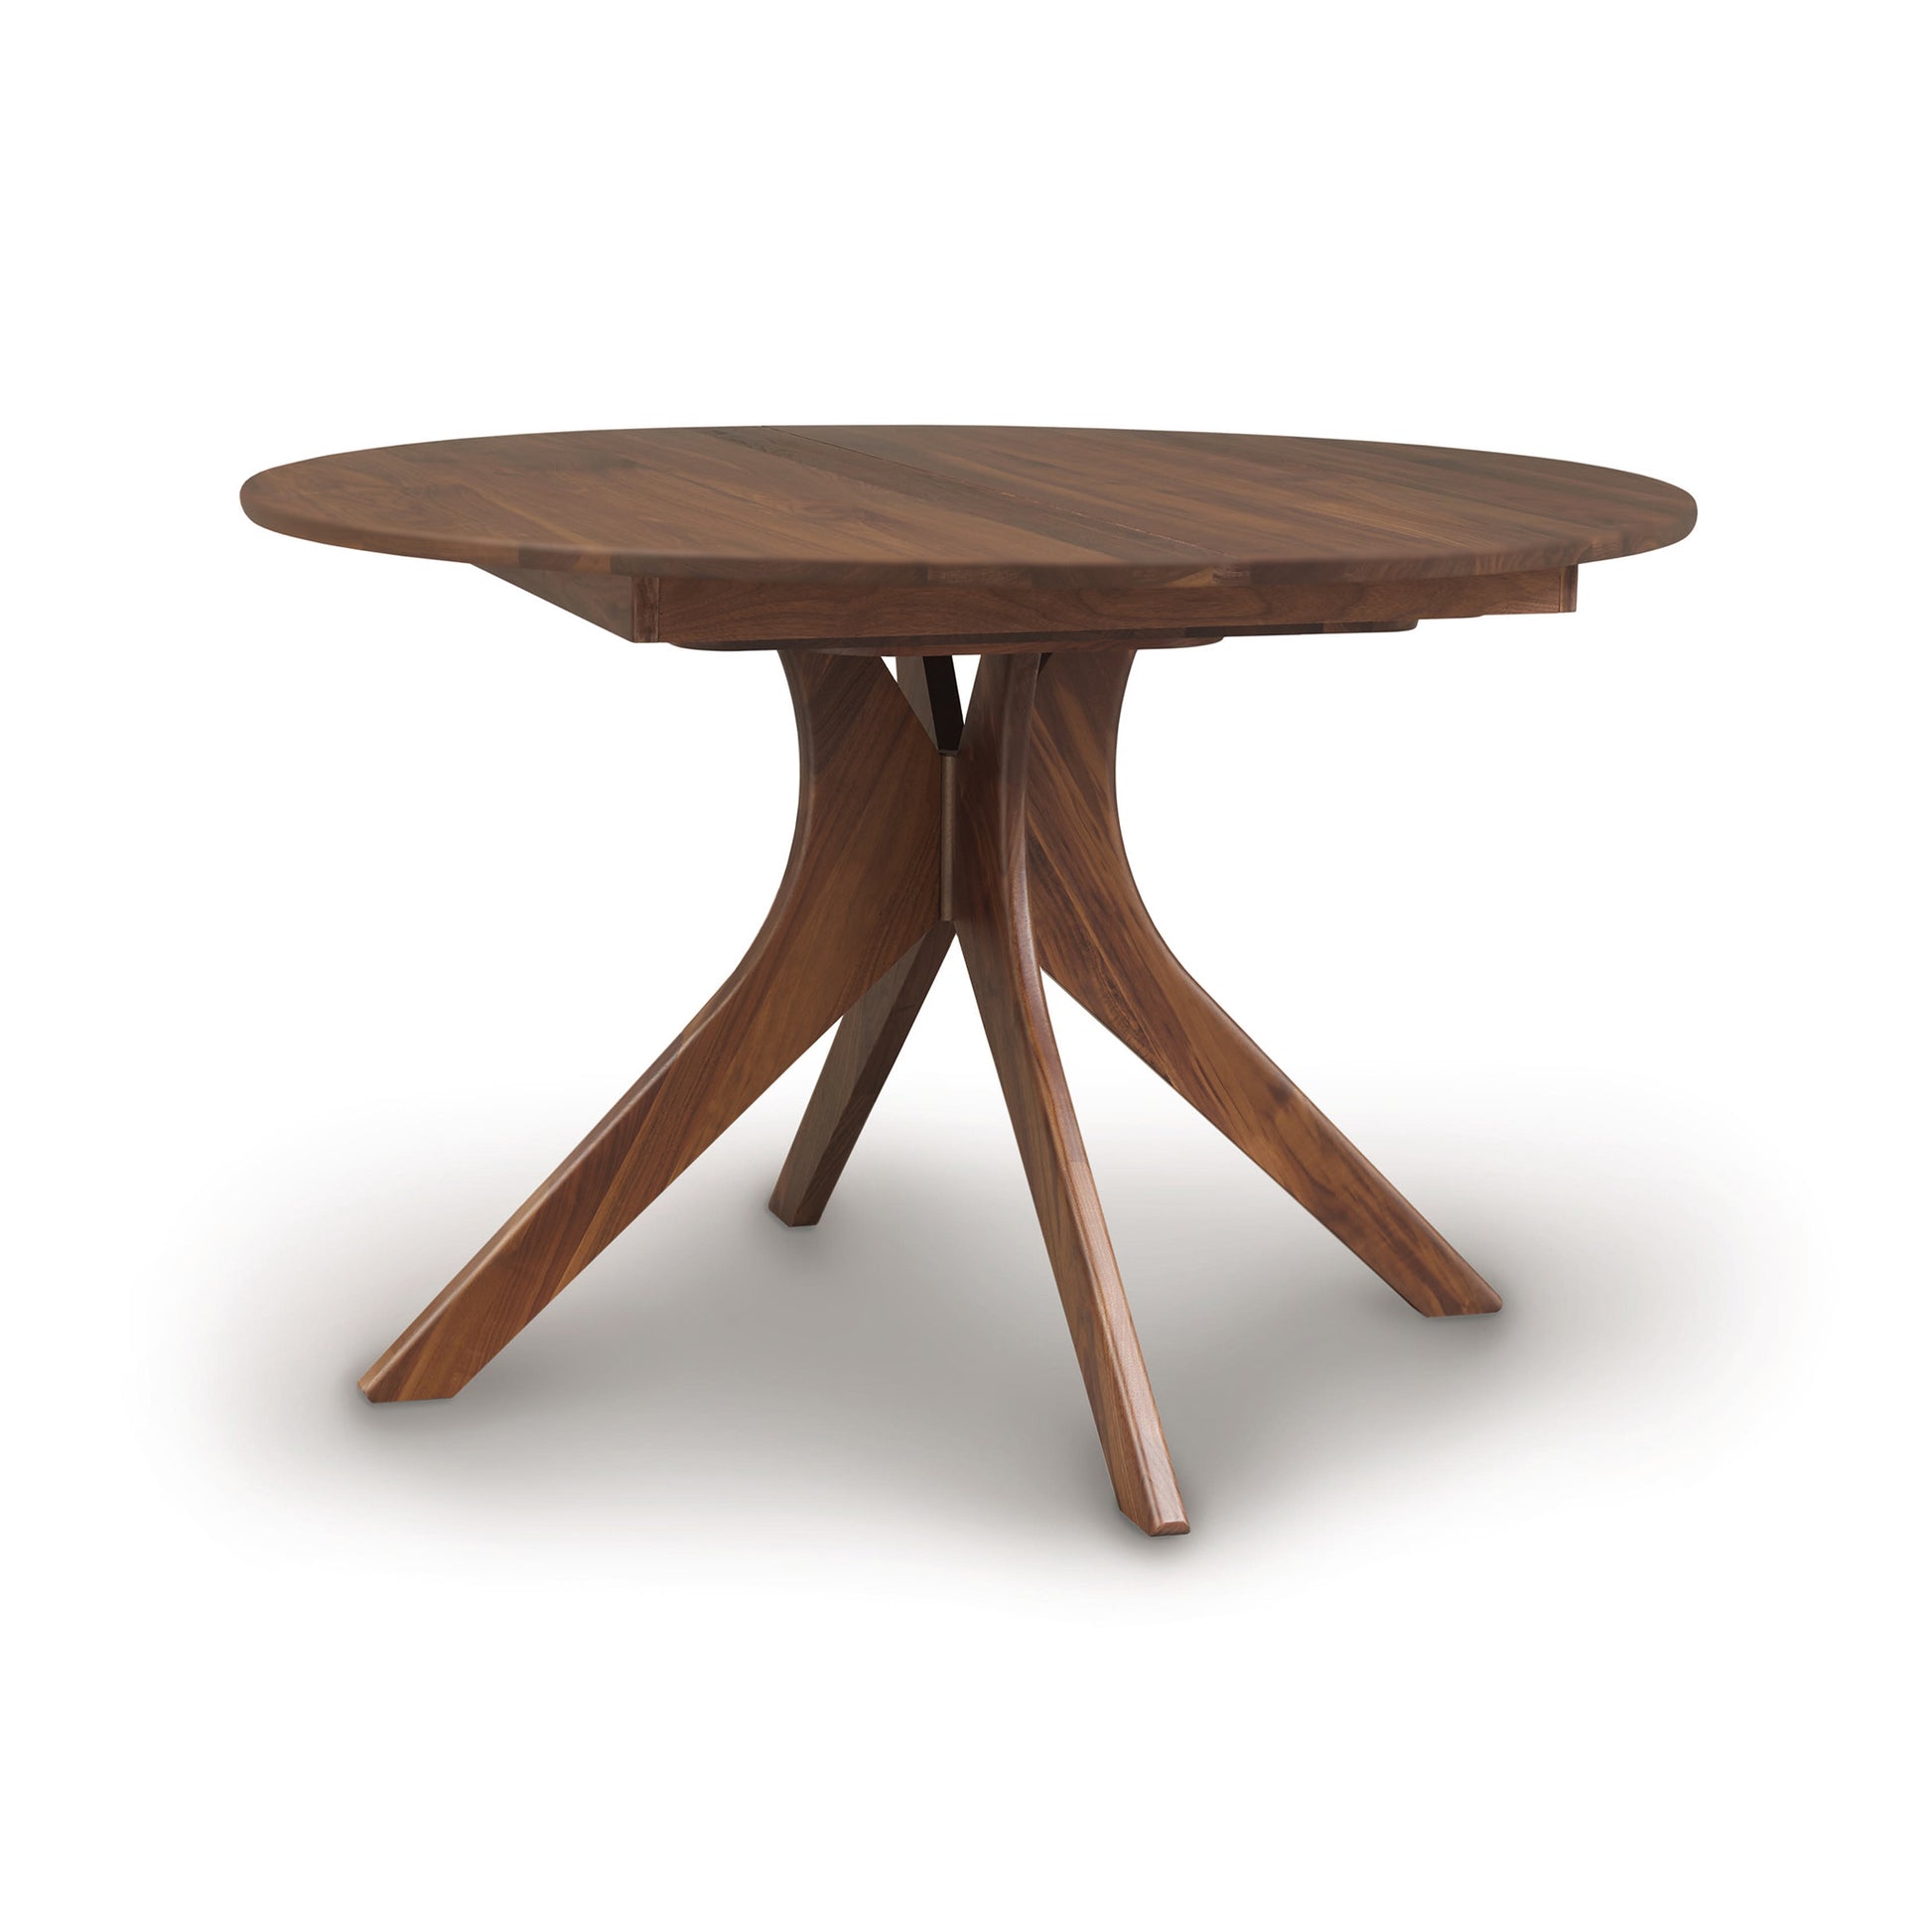 An Audrey Round Extension Dining Table with three legs that is made from solid wood and branded by Copeland Furniture.